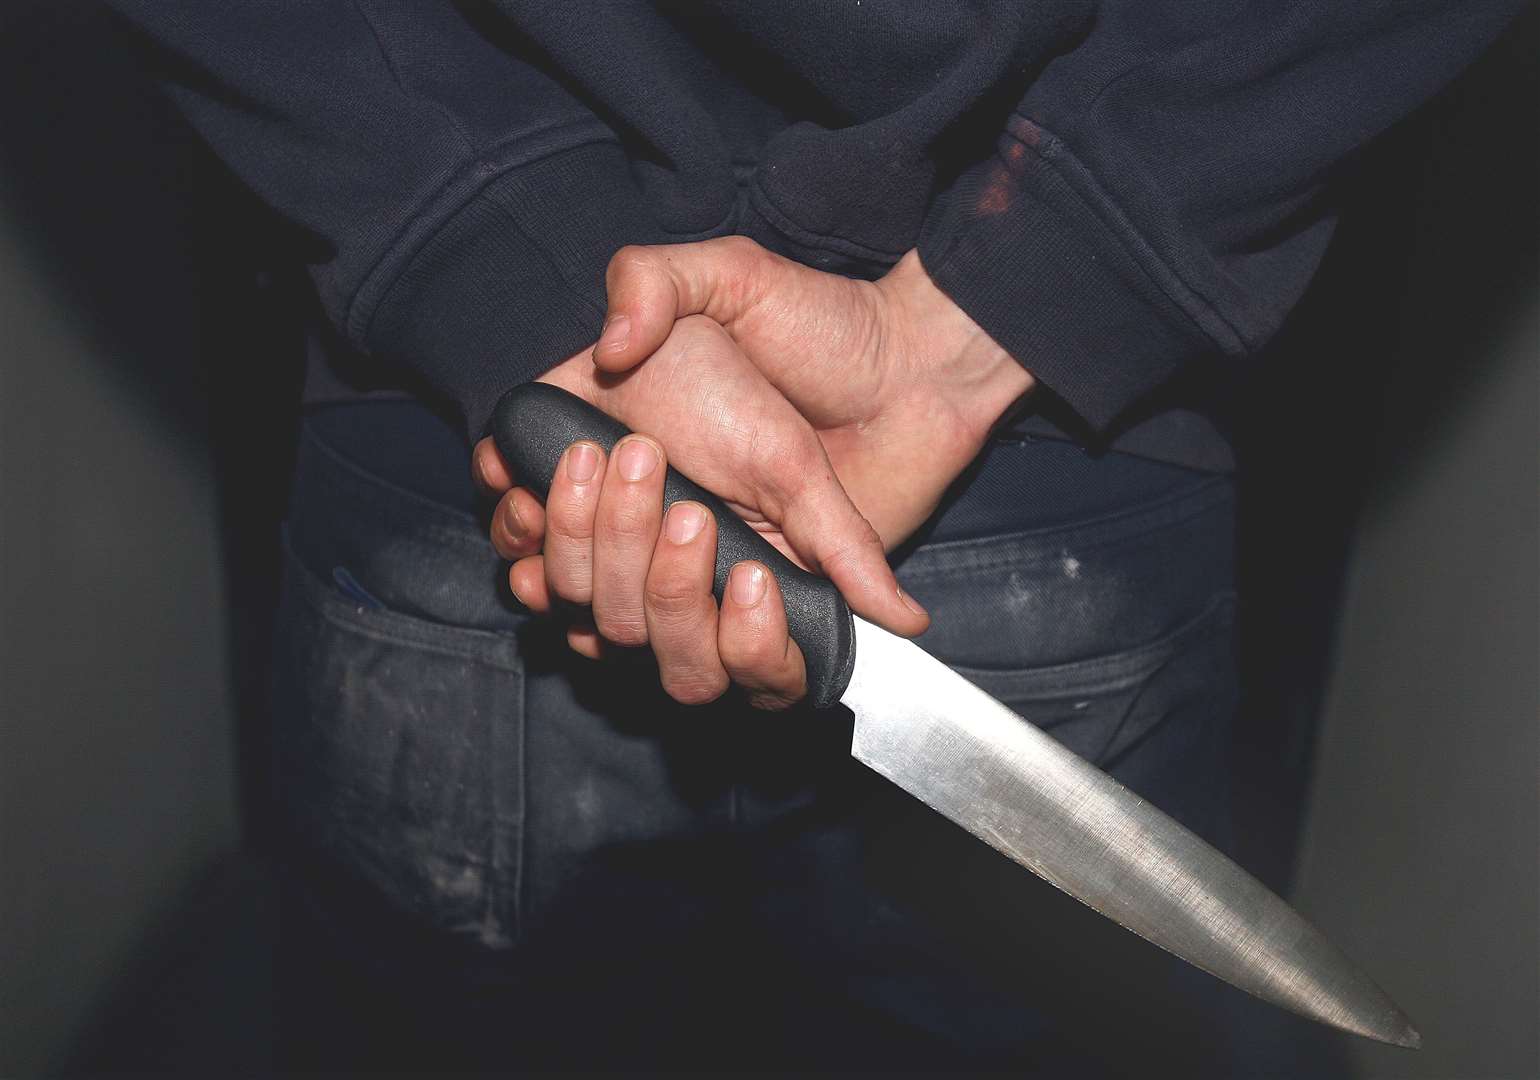 Samuels had taken the knife out in the middle of a supermarket. Stock image